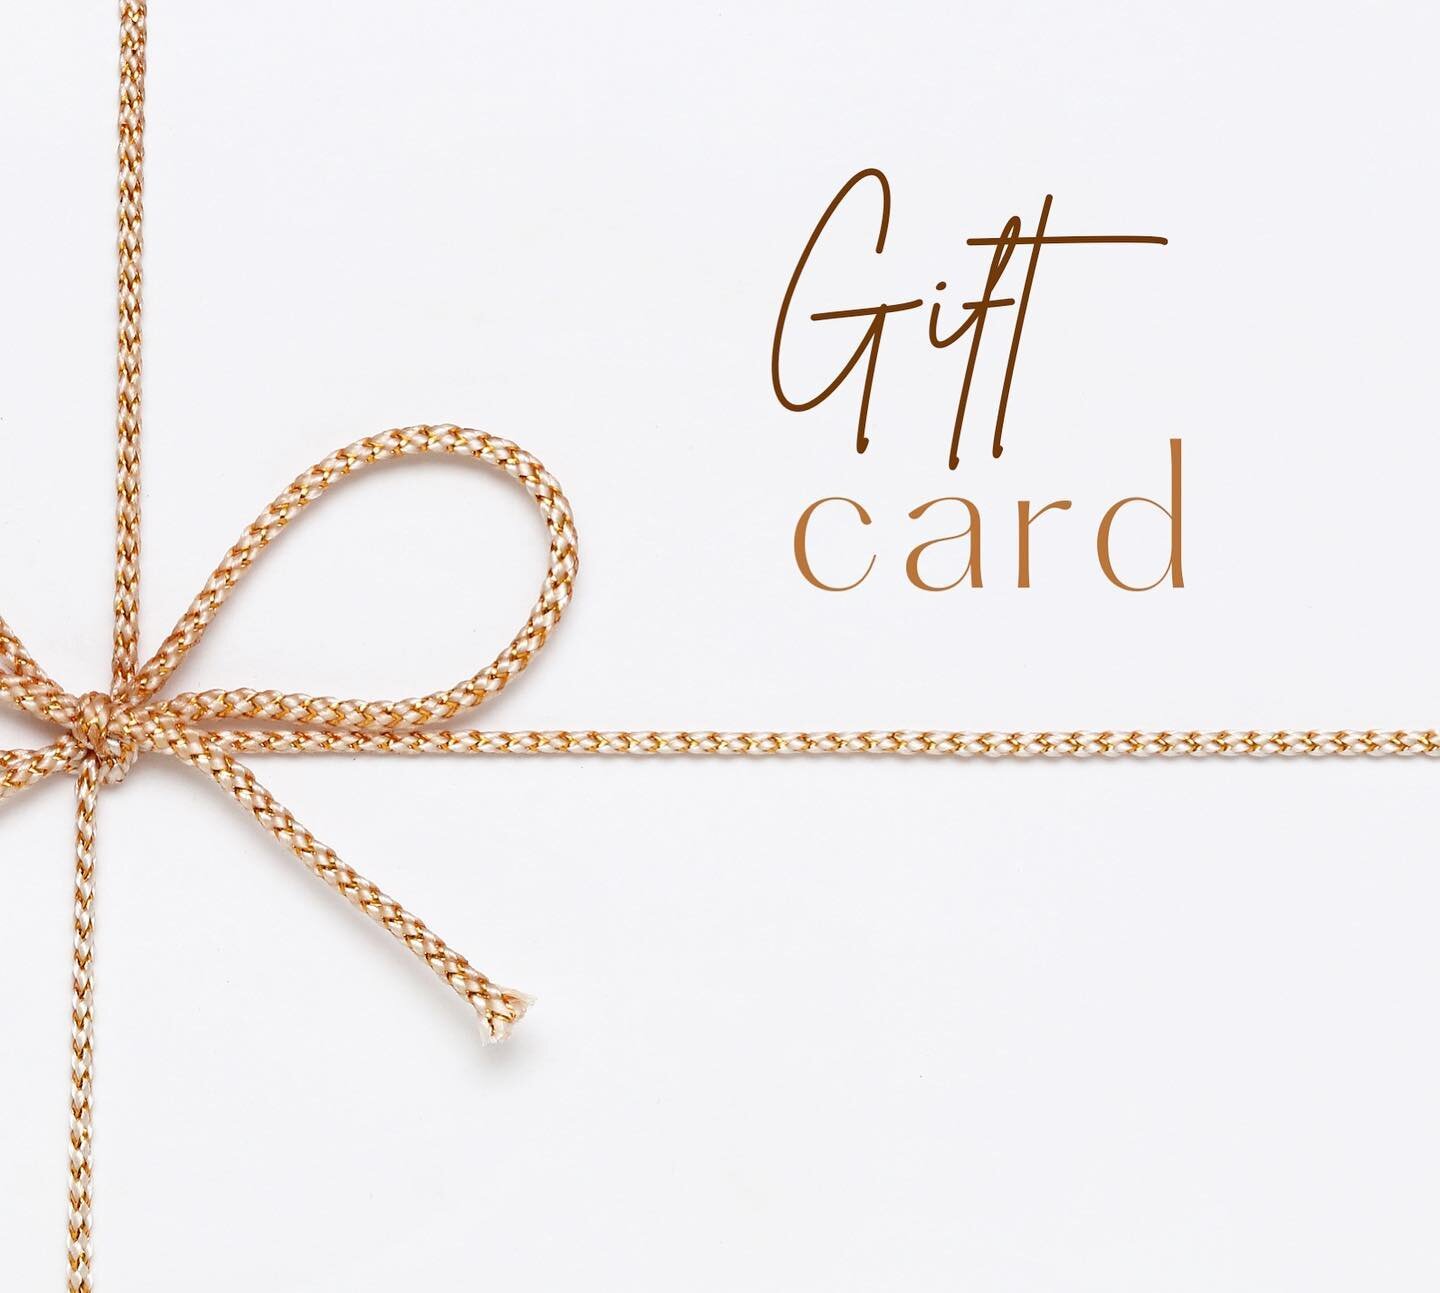 Give the gift of self care this holiday season! Gift cards can be purchased online 24/7 and sent directly to the recipient.
www.browsbyhilary.com

#christmaspresent #christmas #holidayseason #shopsmallclt #shoplocal #supportsmallbusiness #eyebrows #w